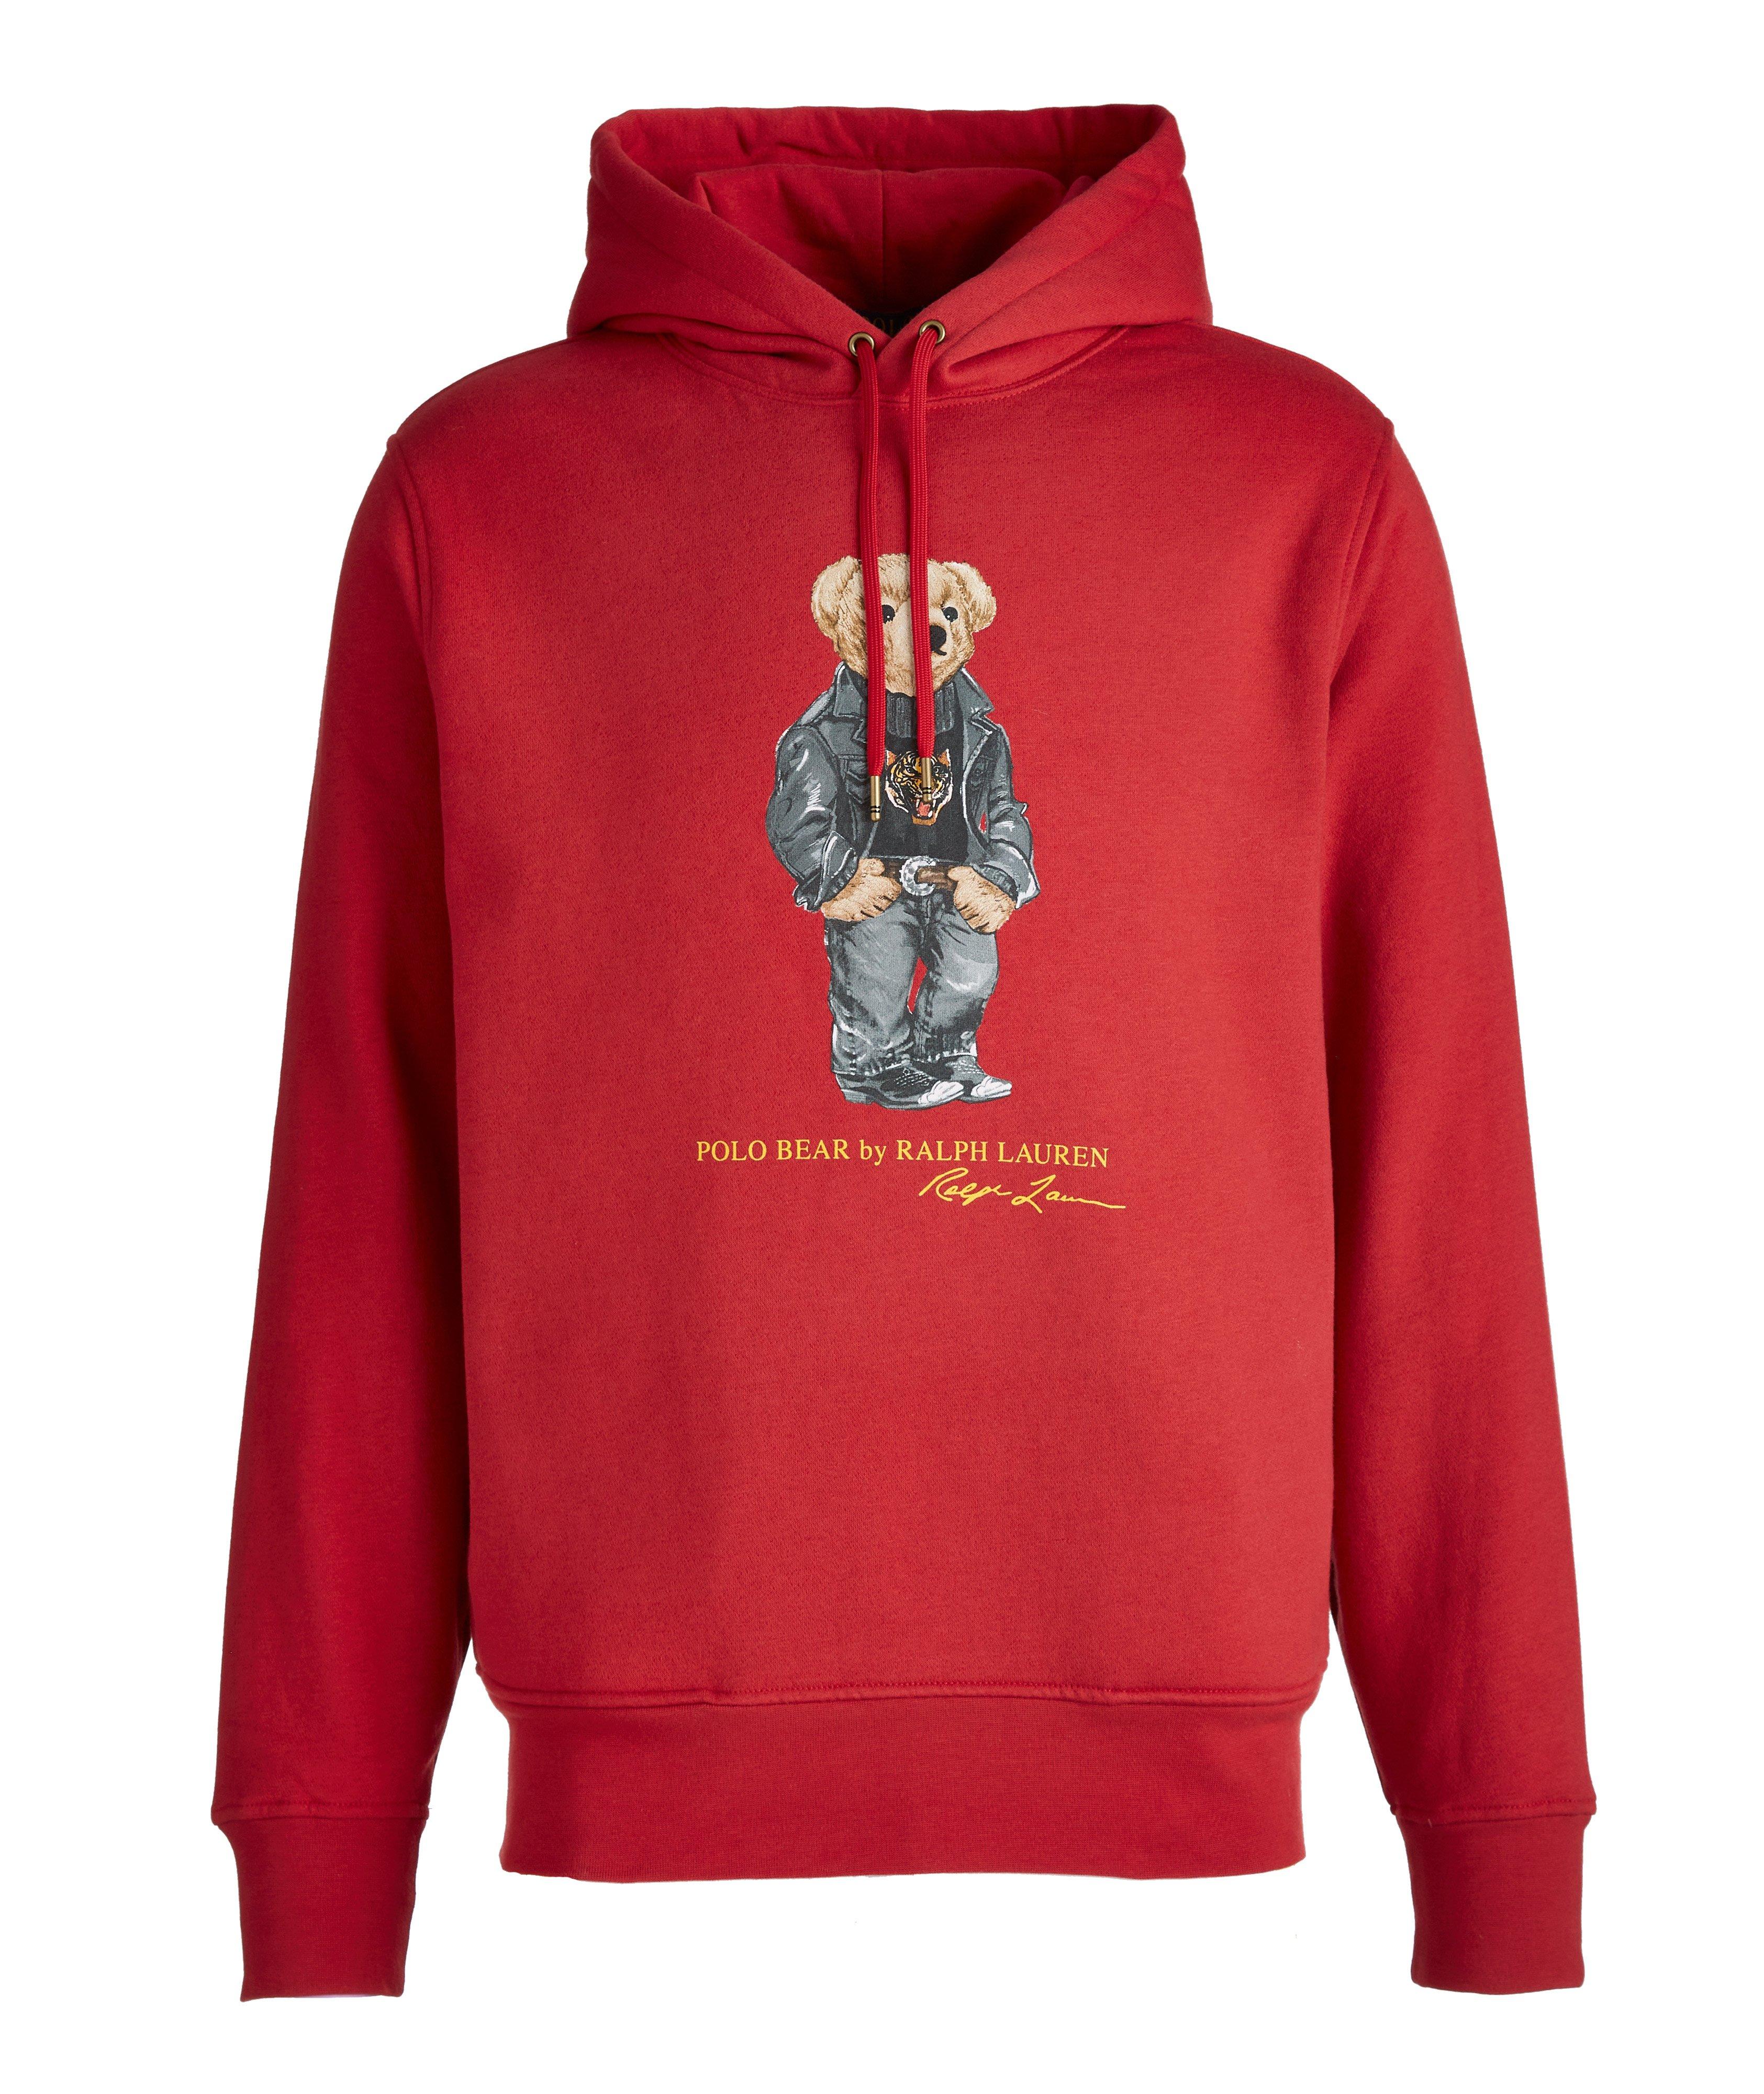  Lunar New Year Zip Up Sweater image 0